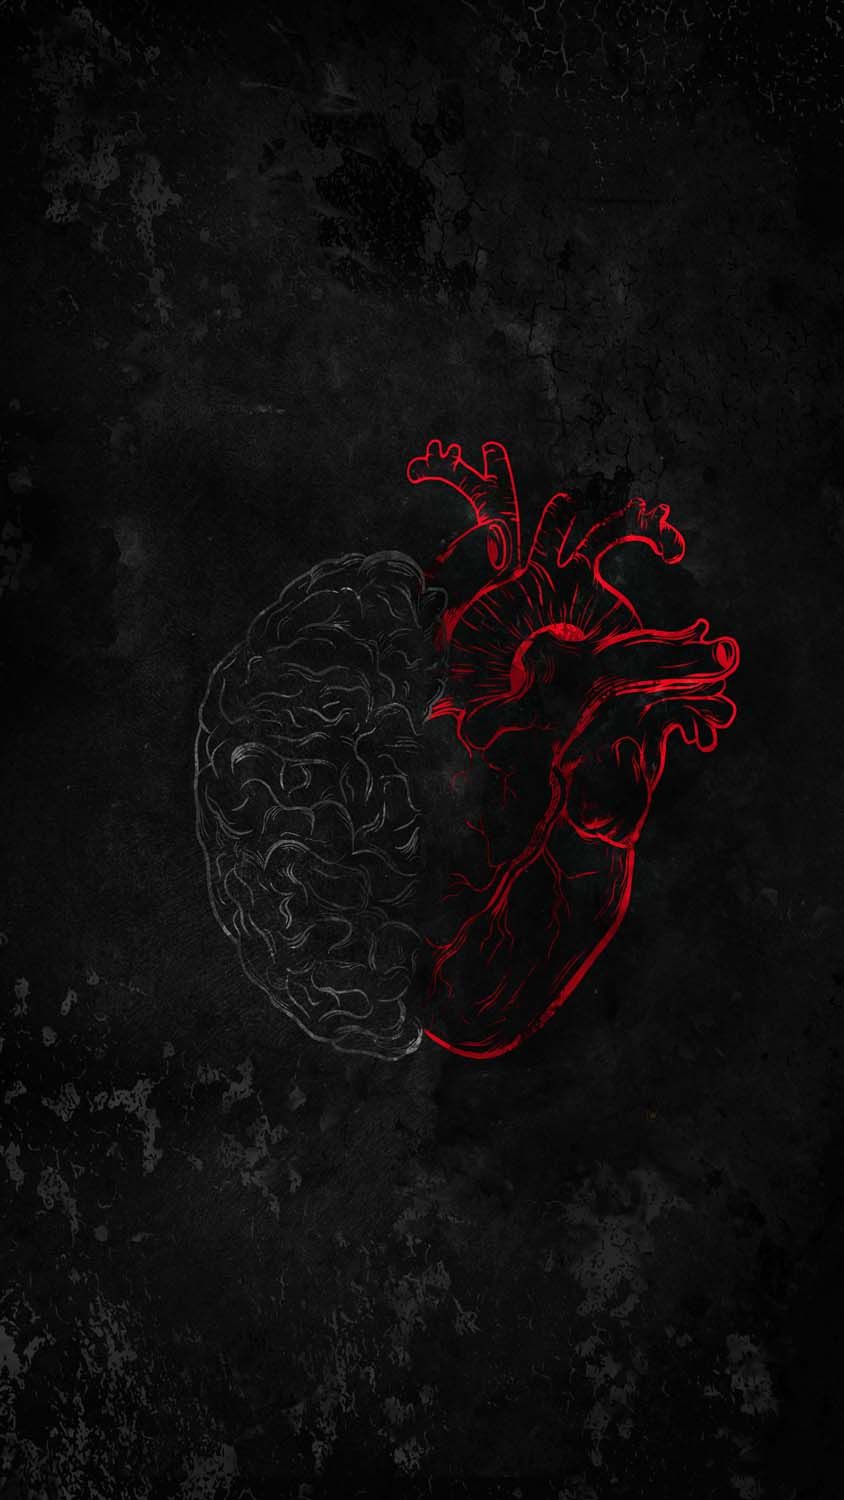 A black and red drawing of the heart - Heart